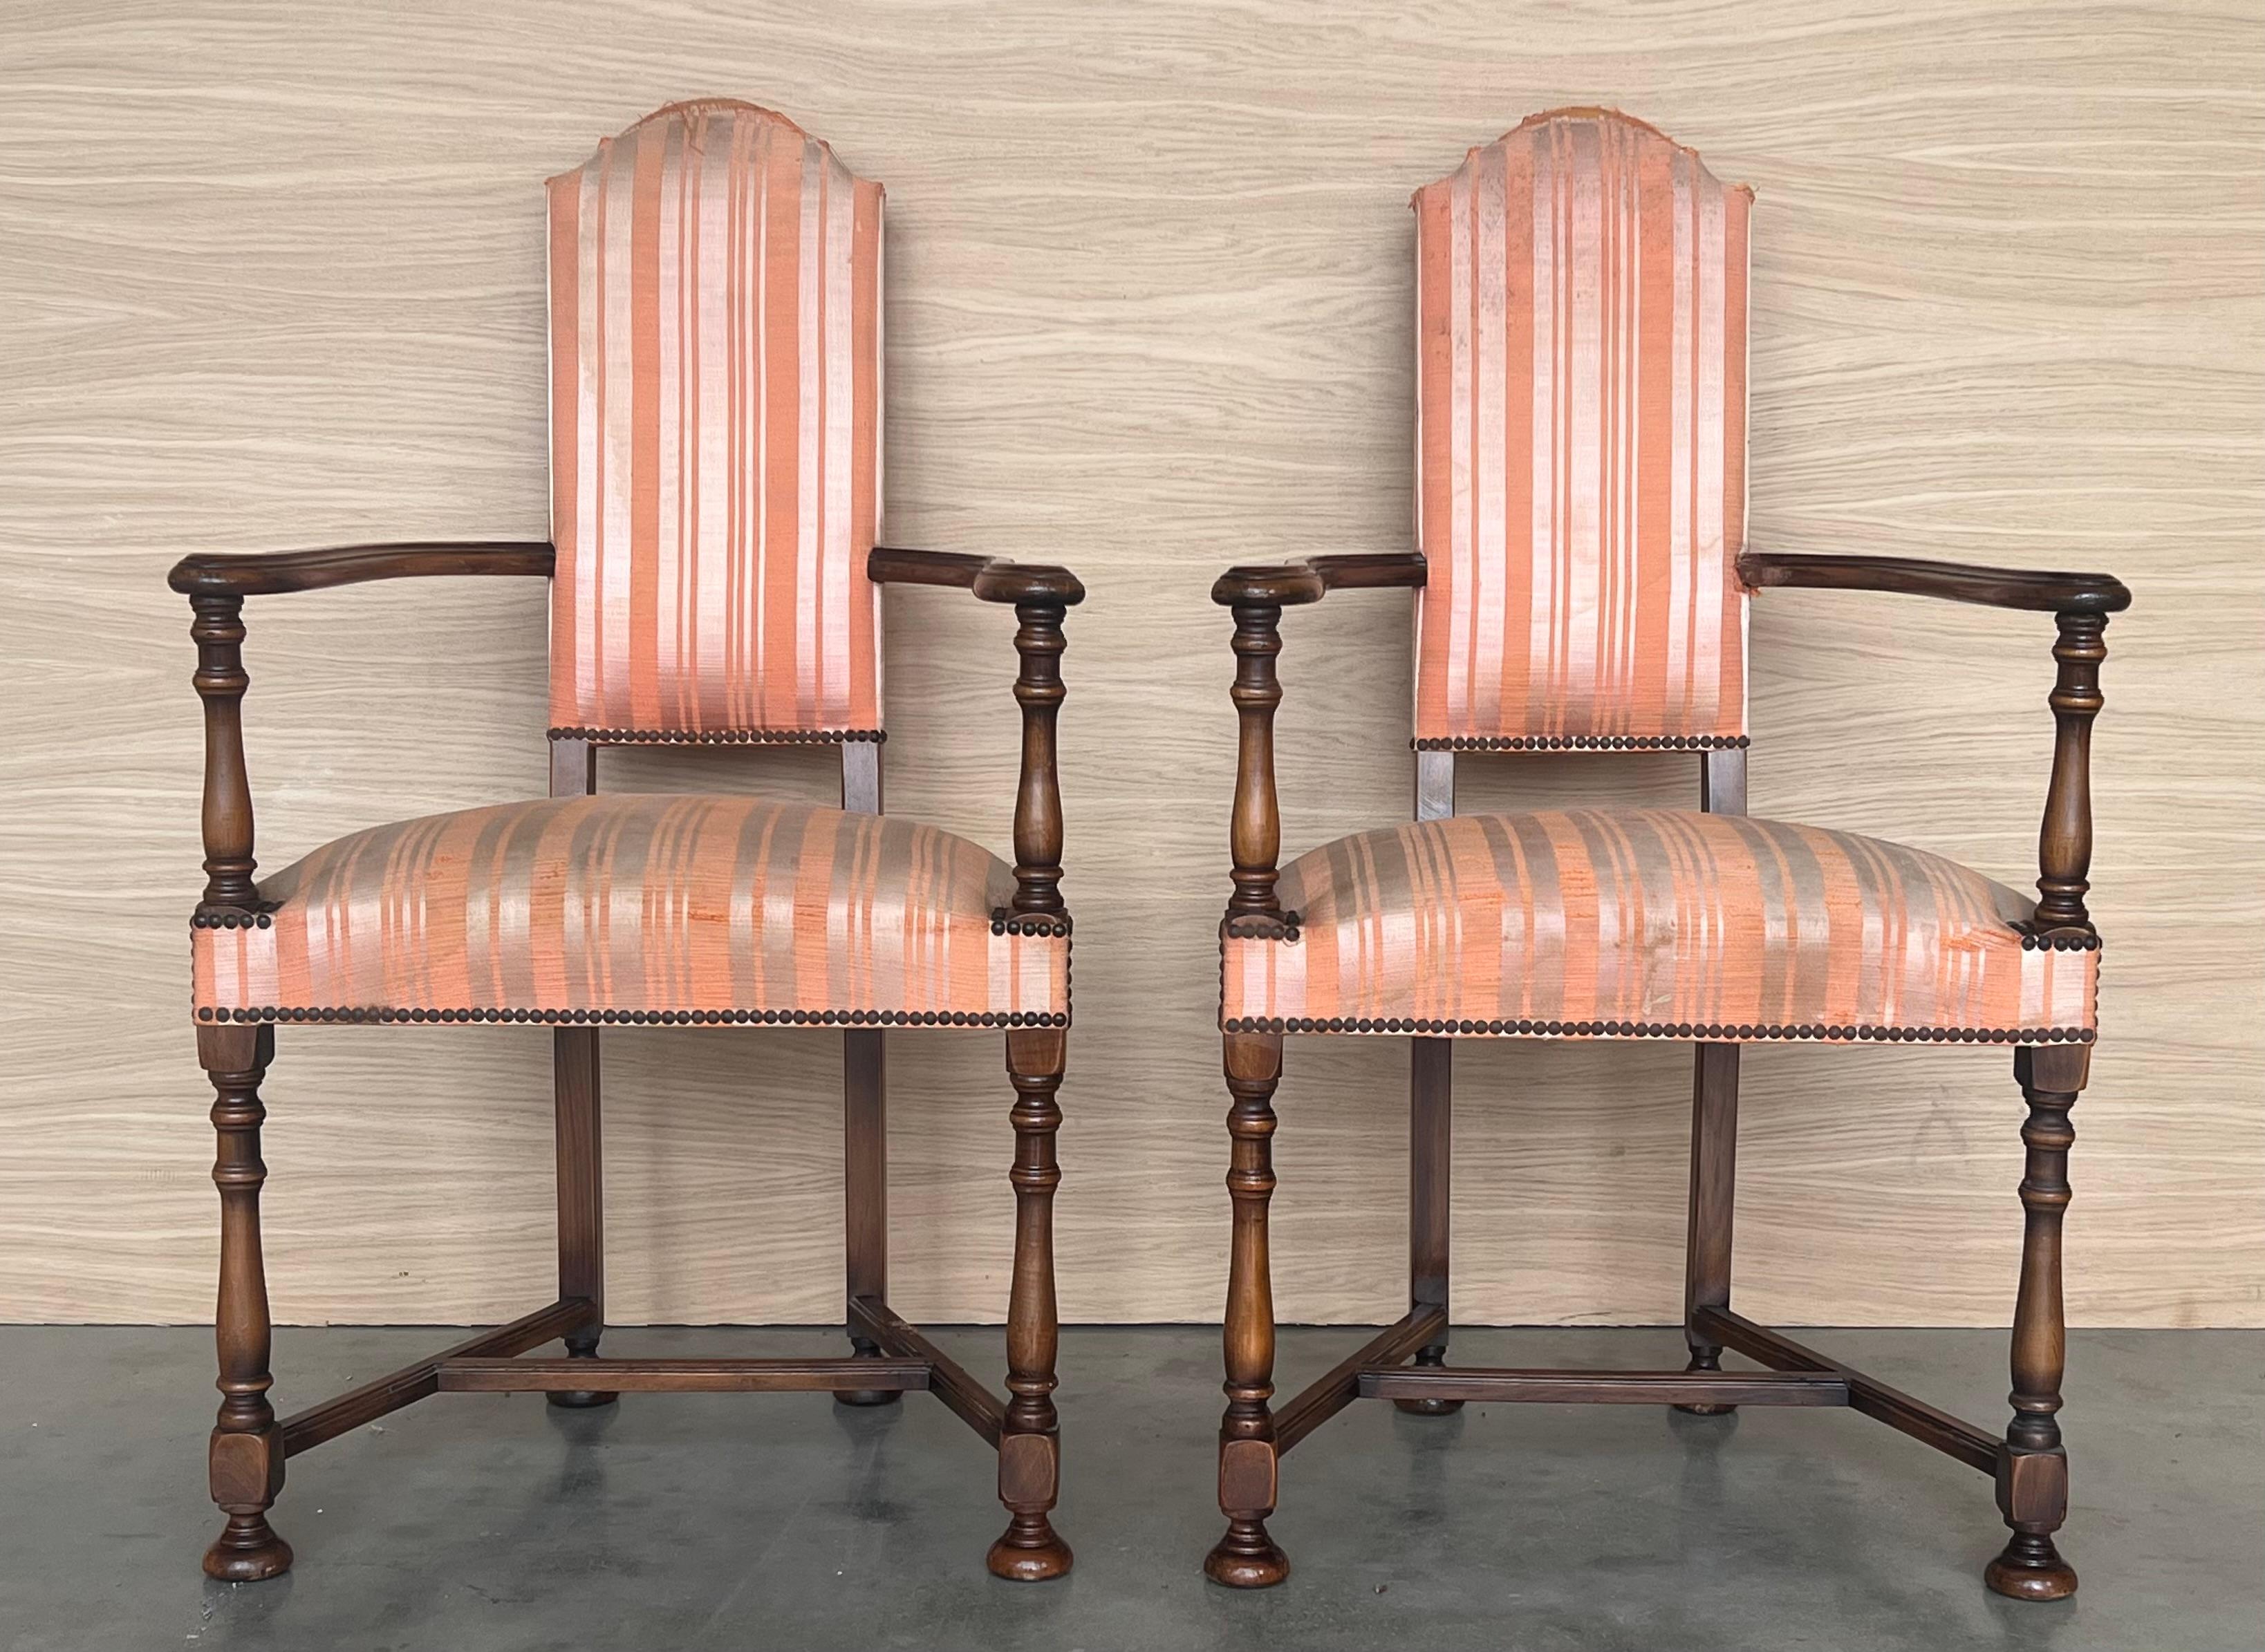 Pair of Spanish Armchairs with High Back signed by Valenti

The fabric is dirty and needs a reupholstered.